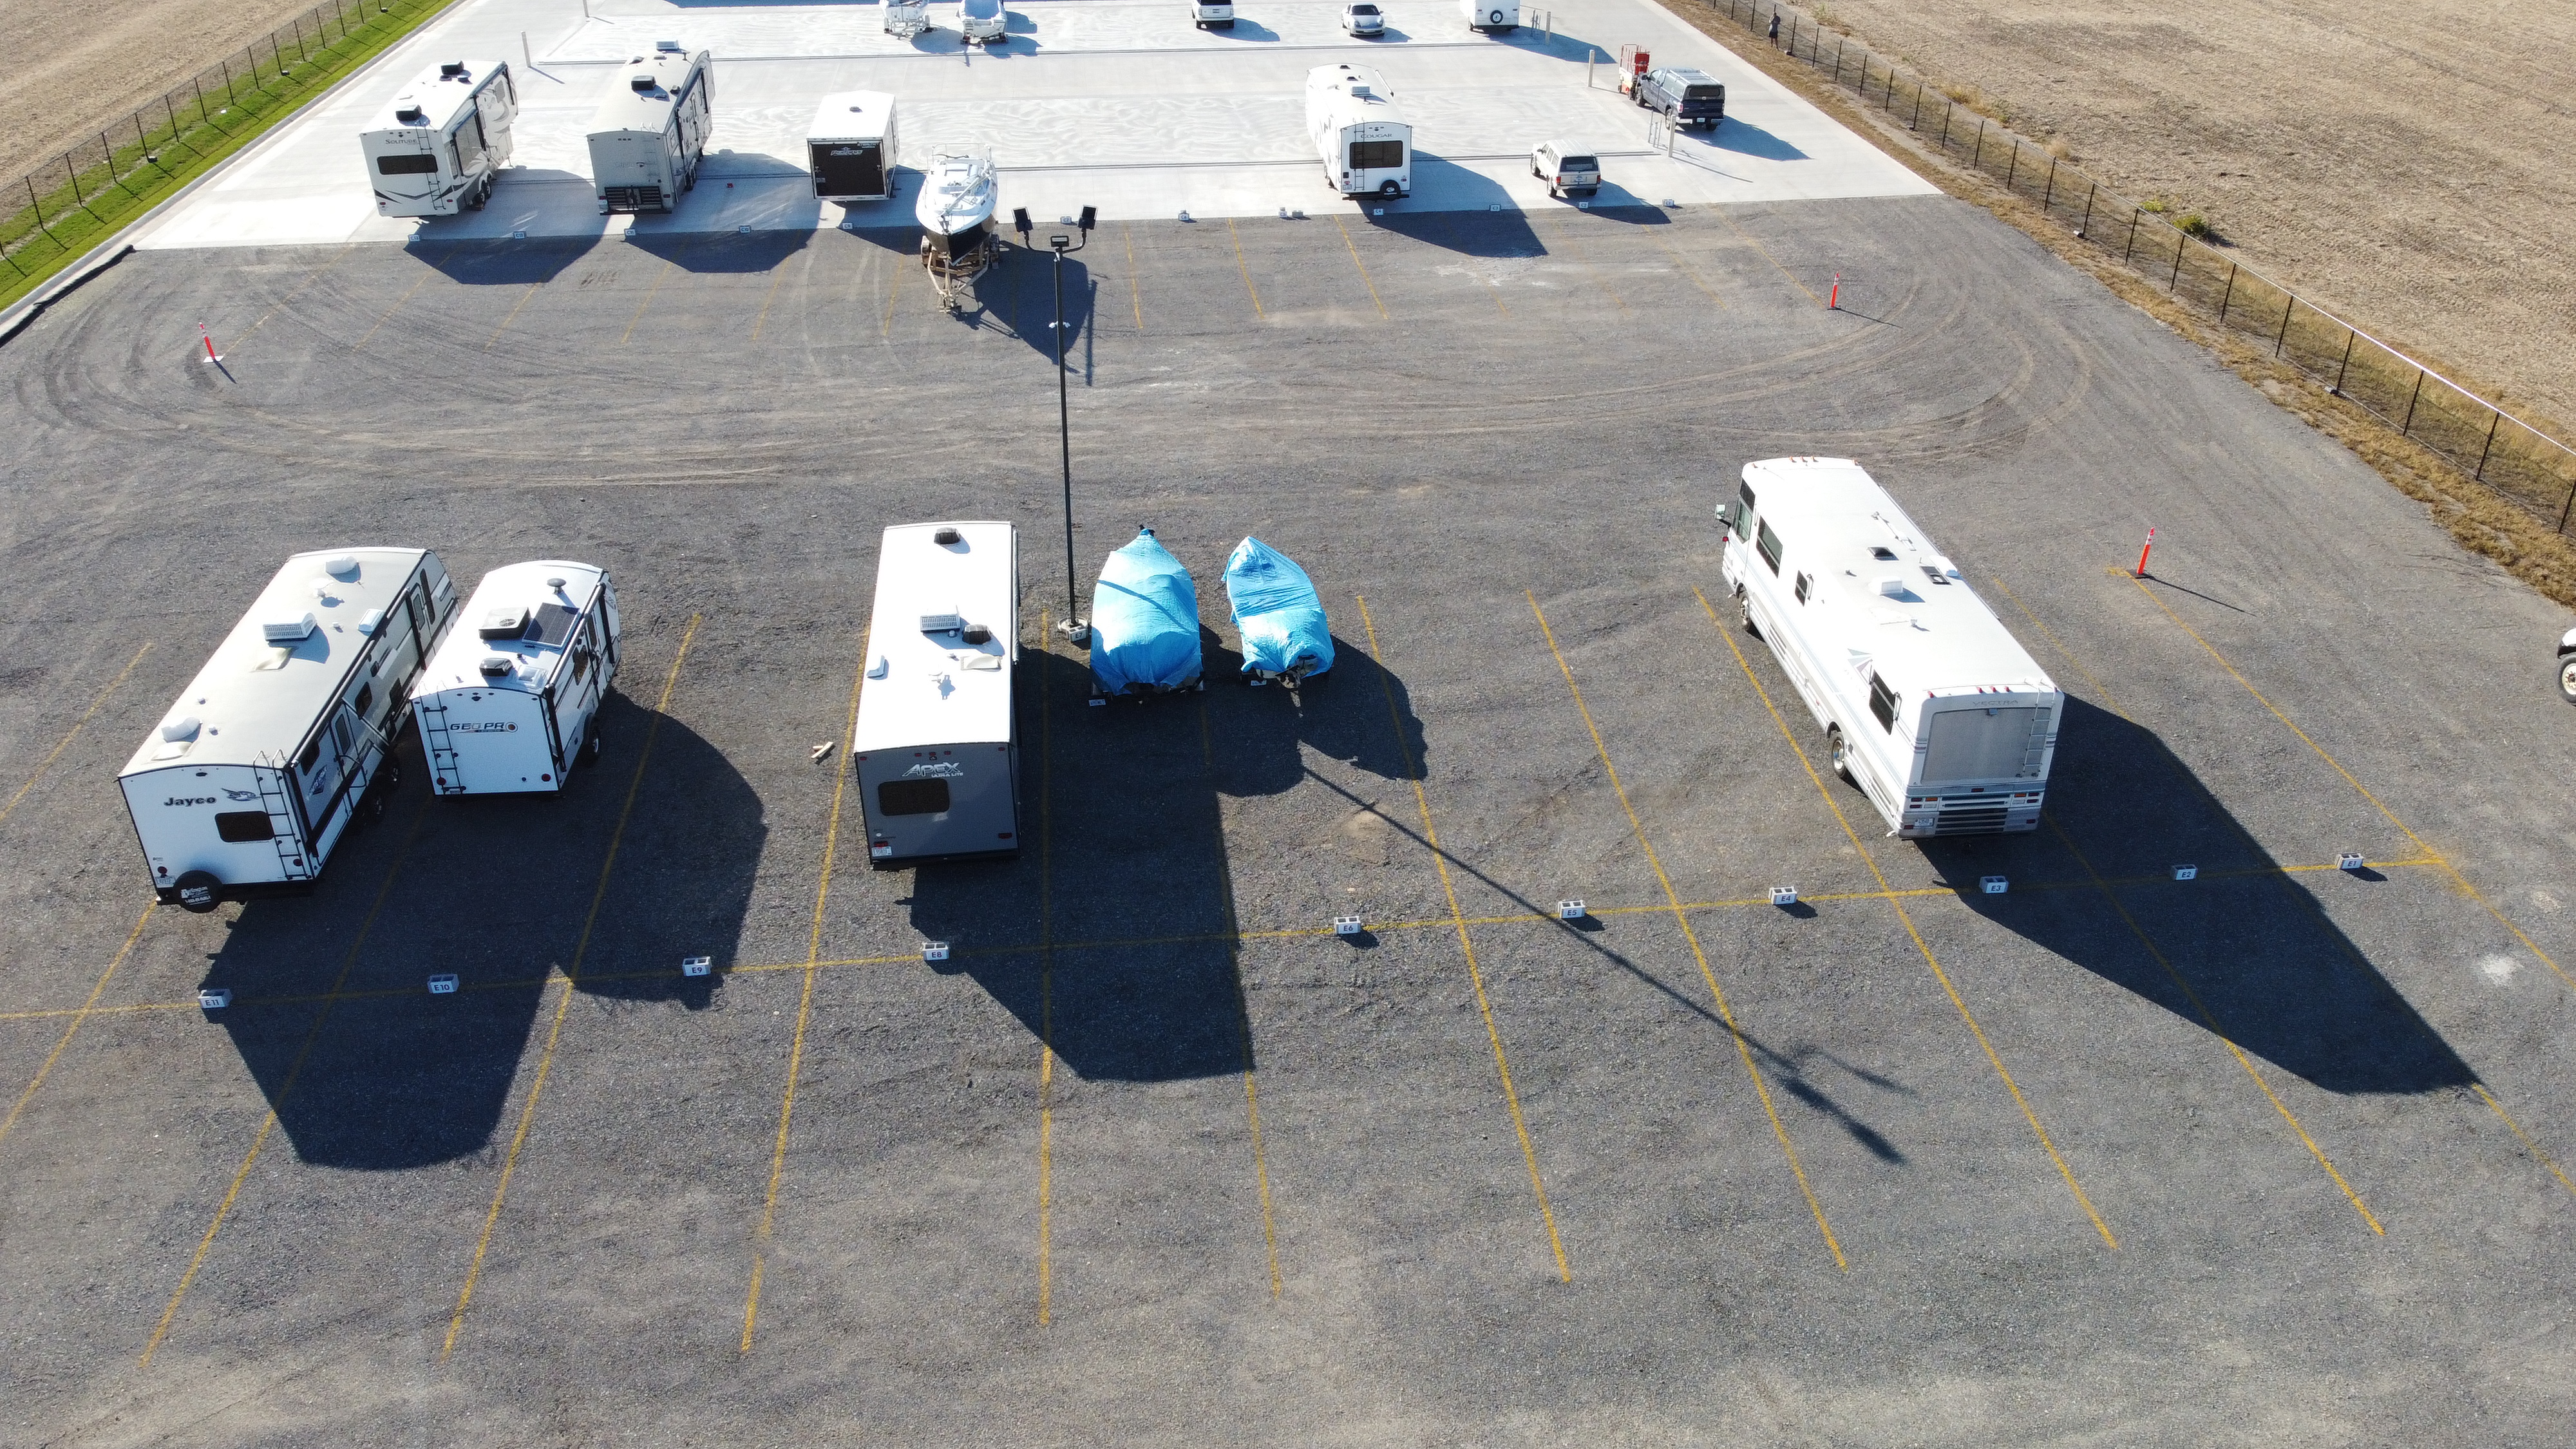 Secure concrete and gravel space options for your RV or boat